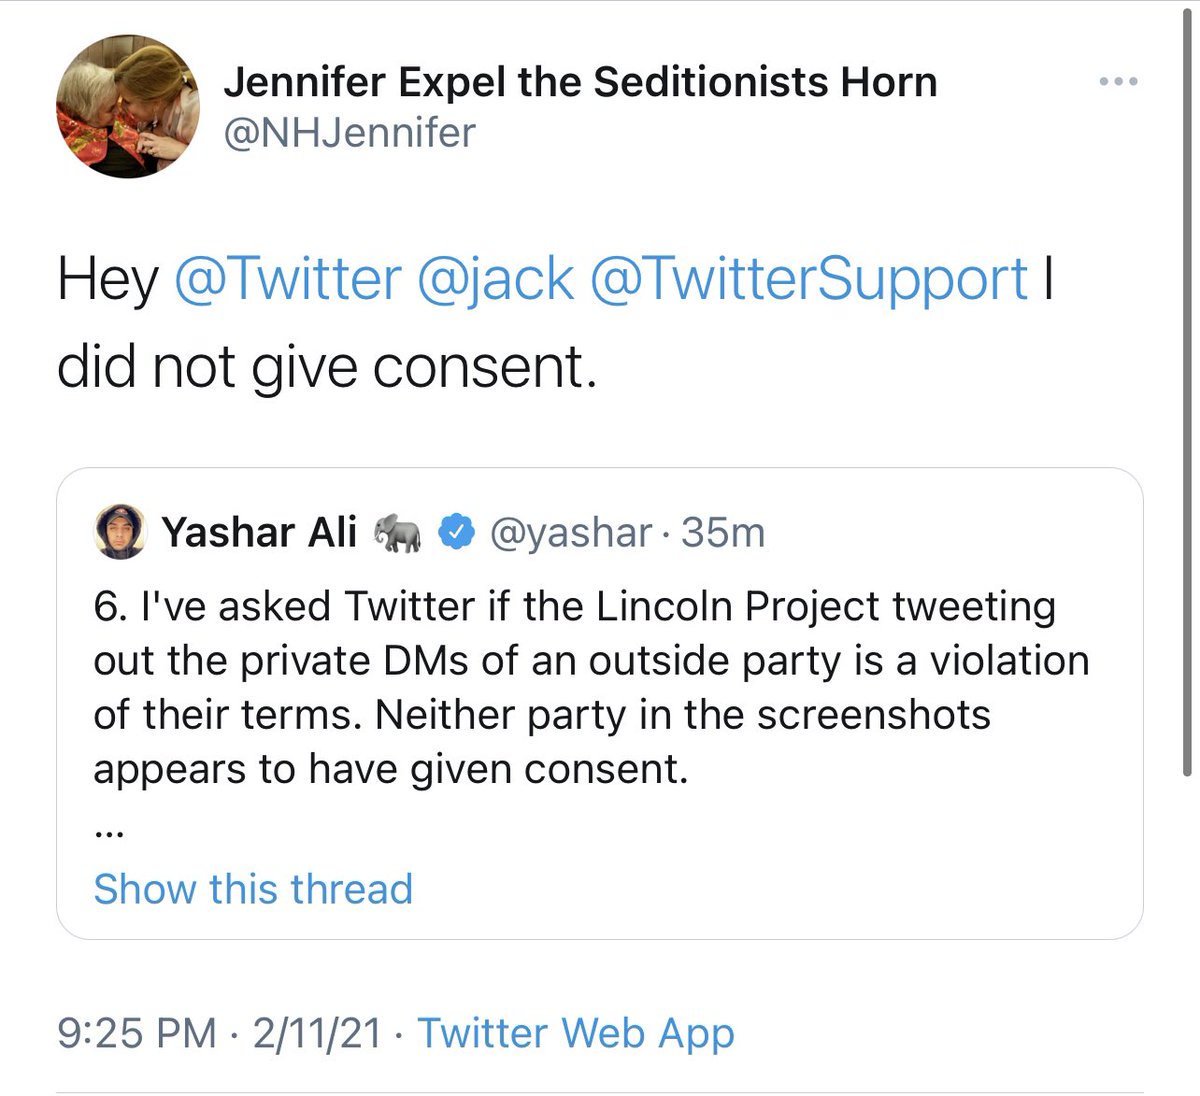 9. Important....I’m told that  @NHJennifer did not have a laptop or phone issued by the Lincoln Project.It is unclear how they accessed her direct messages in order to tweet them.It wouldn’t have been through a company issued phone or laptop and she did not give them consent